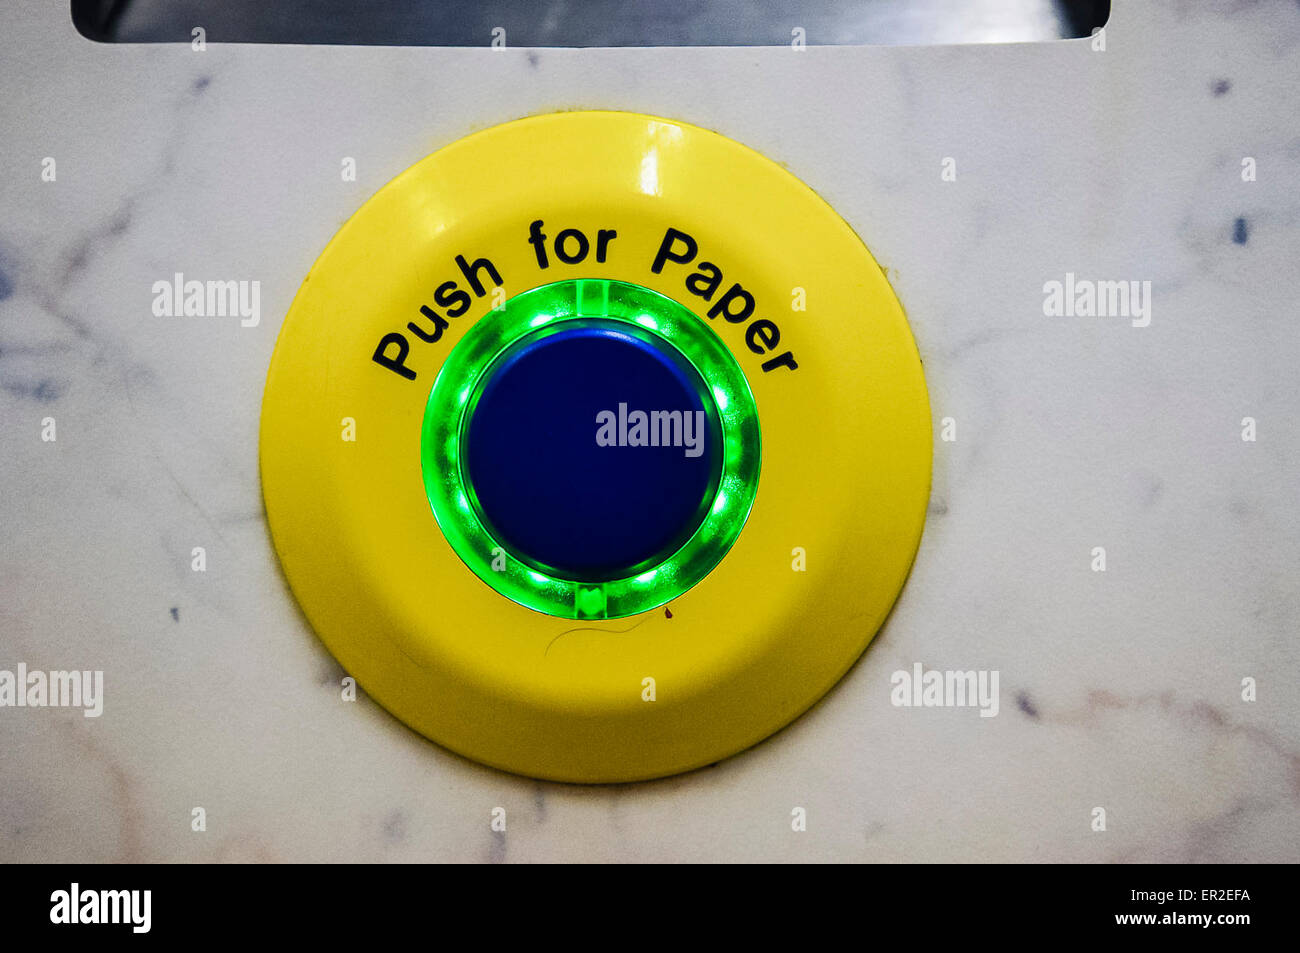 Button marked 'Push for paper' in an automatic public toilet. Stock Photo